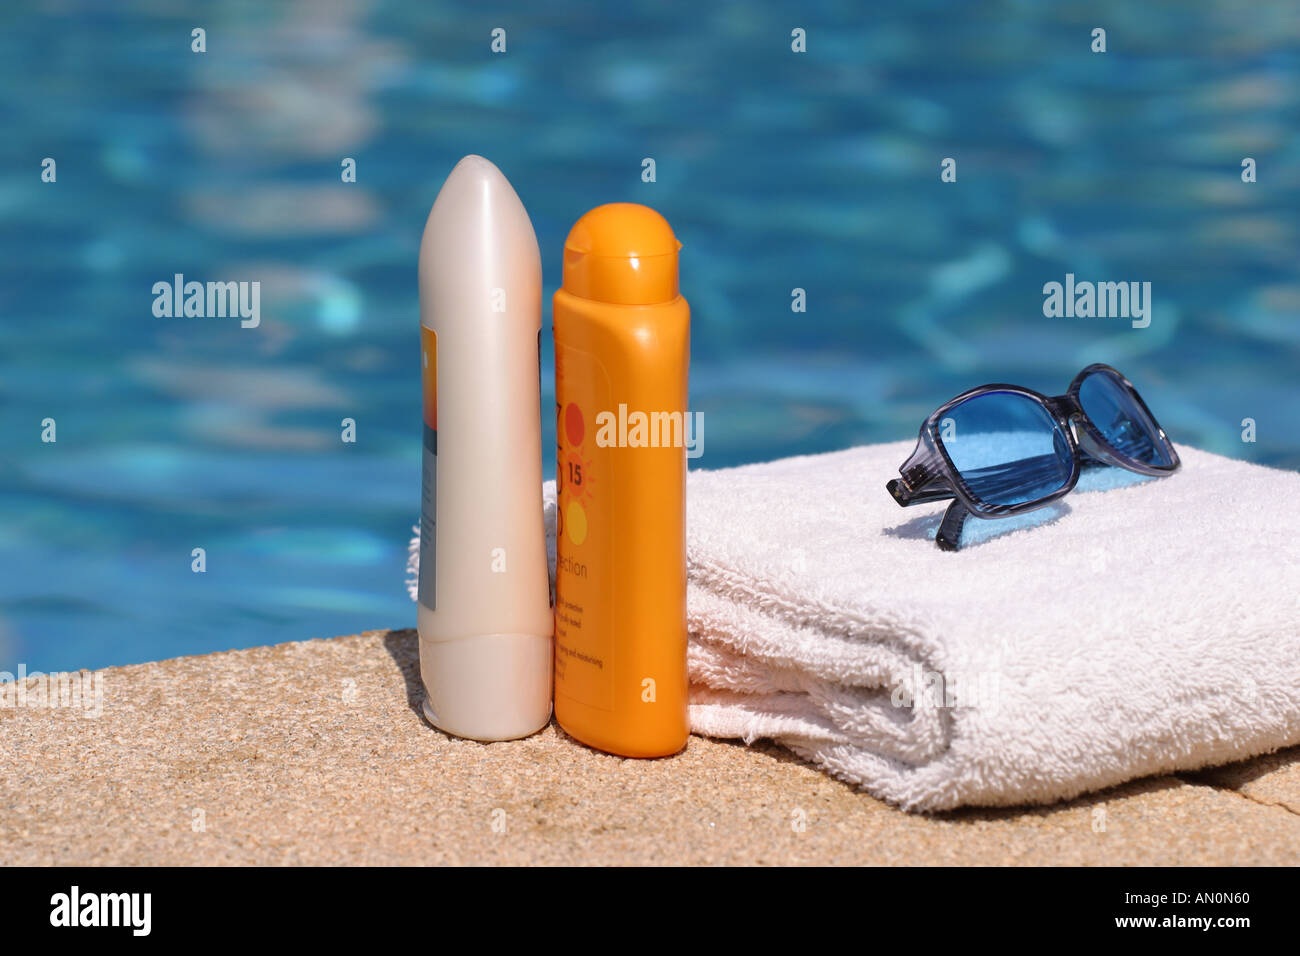 Holiday Sun cream sunglasses and towel next to swimming pool Stock Photo